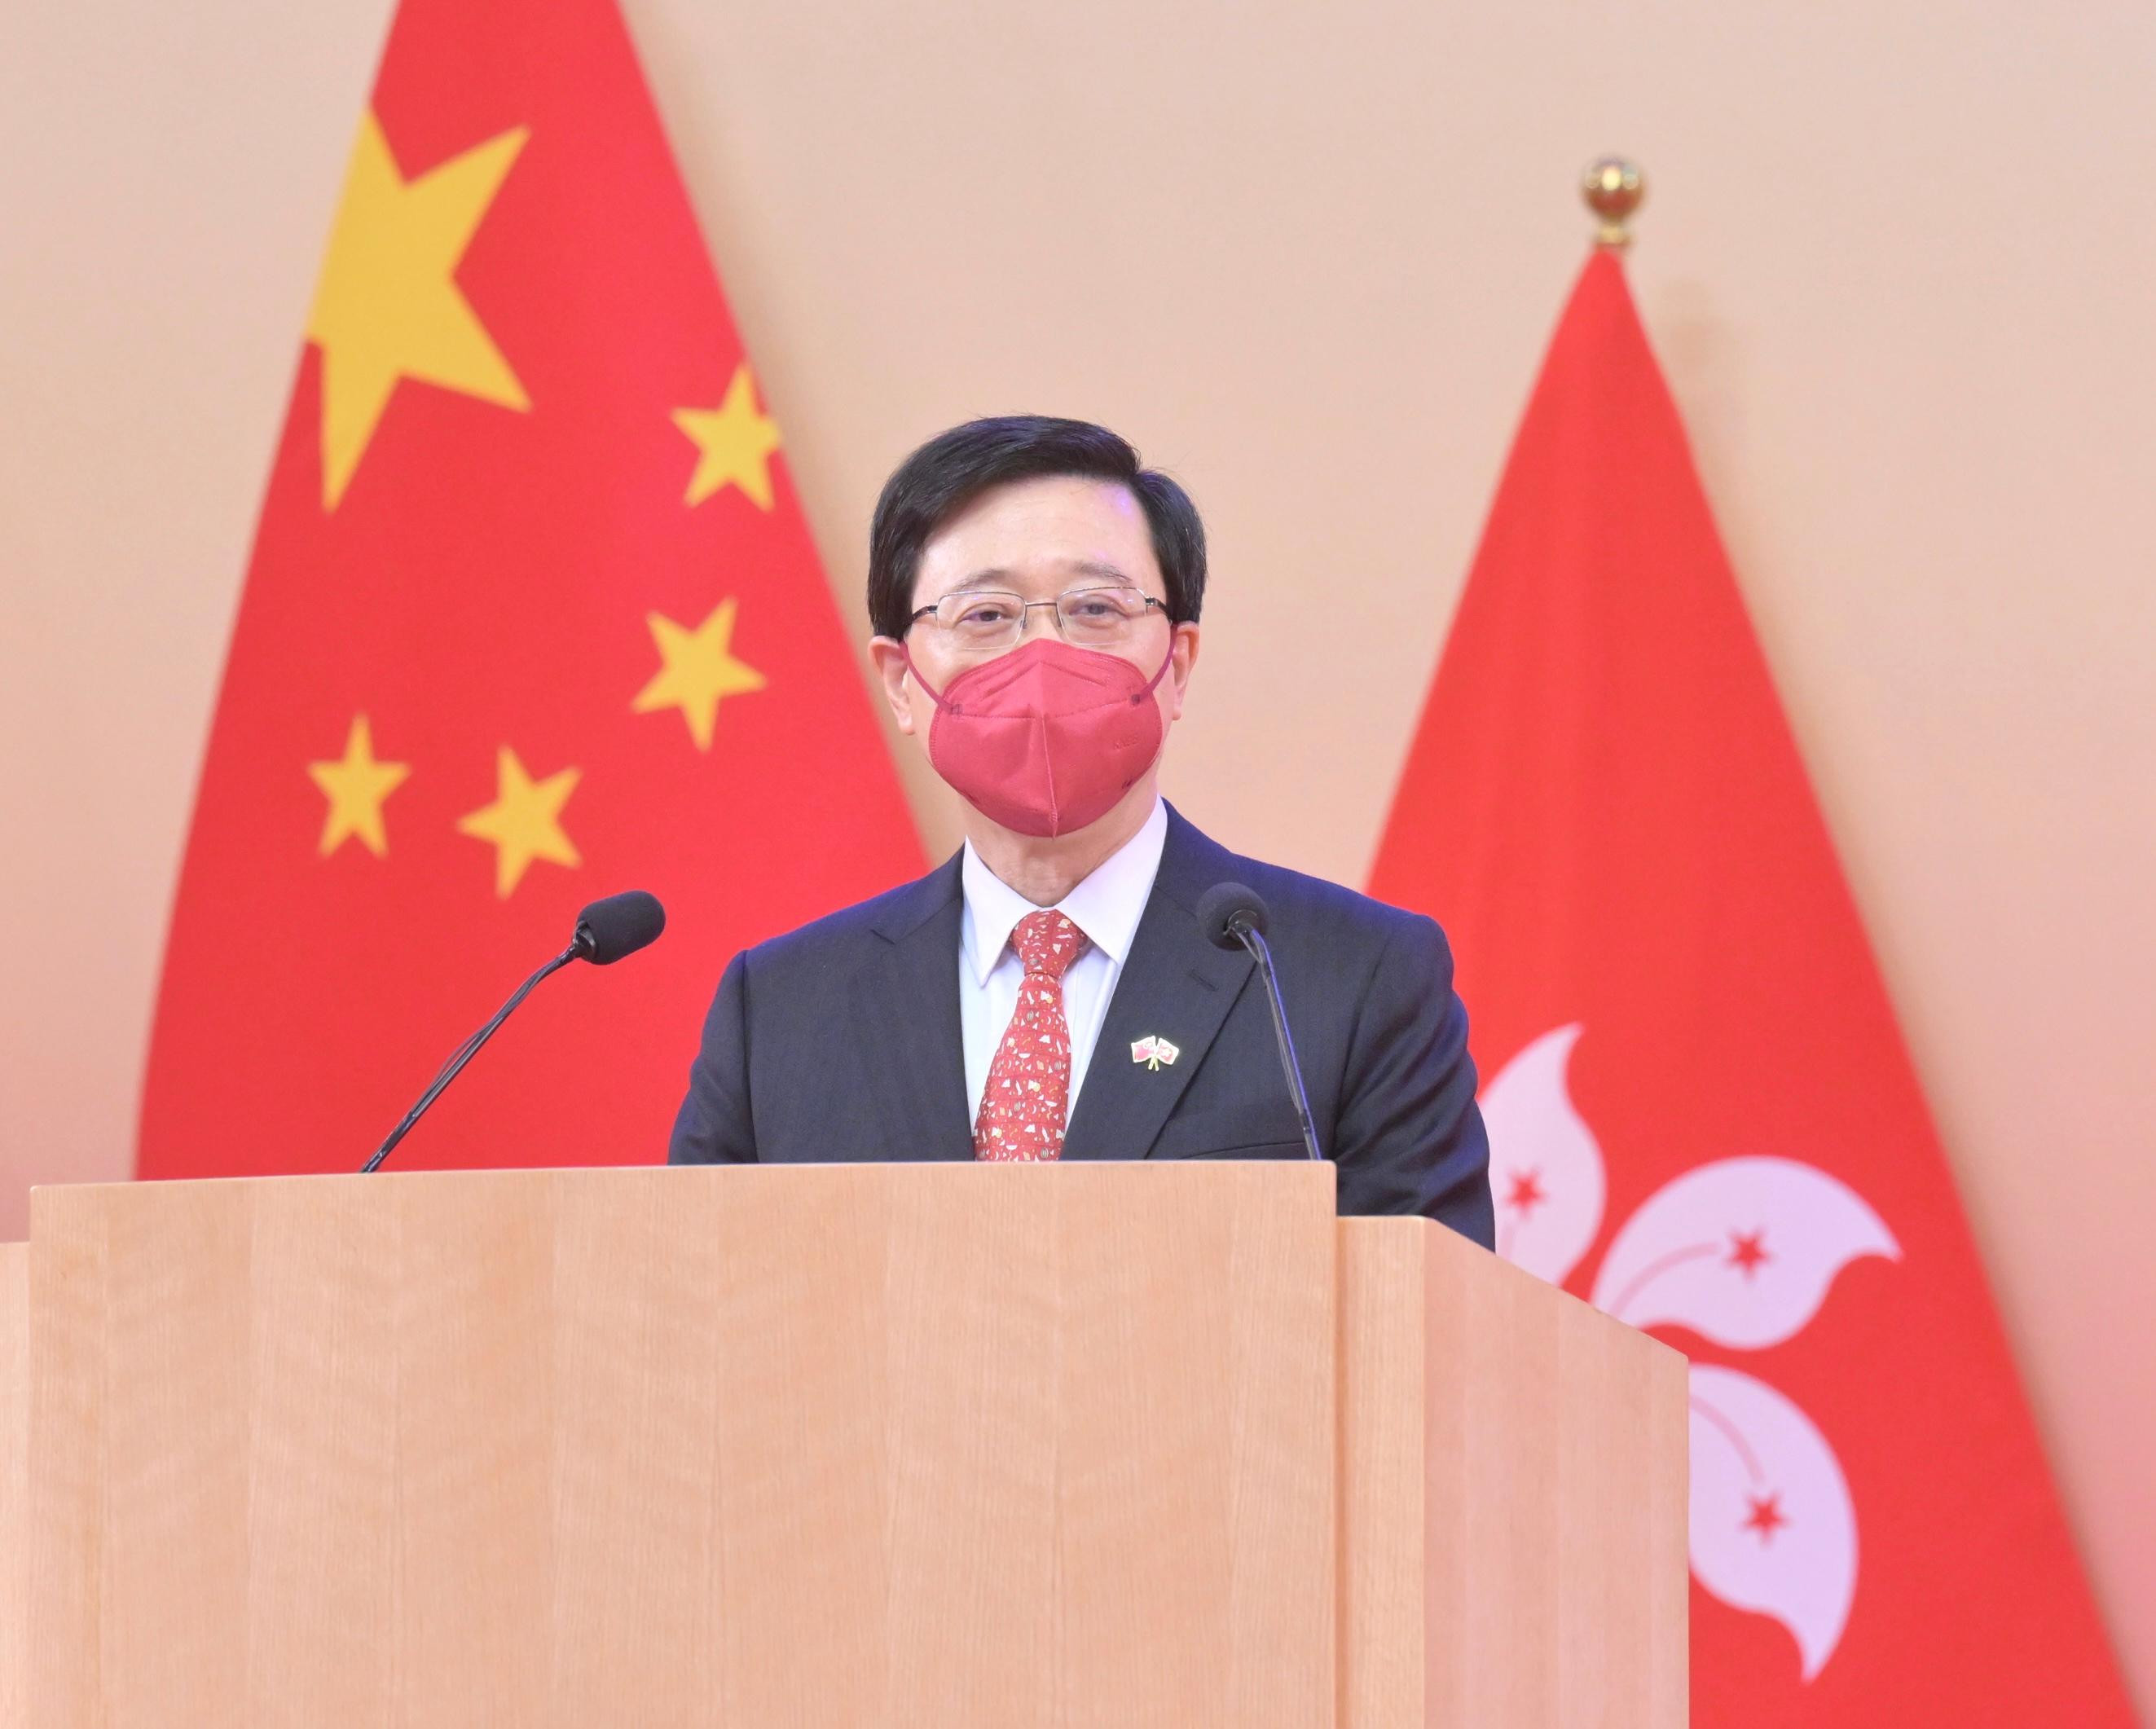 The Chief Executive, Mr John Lee, together with Principal Officials and guests, attended the reception for the 73rd anniversary of the founding of the People's Republic of China at the Hong Kong Convention and Exhibition Centre this morning (October 1). Photo shows Mr Lee addressing the reception.